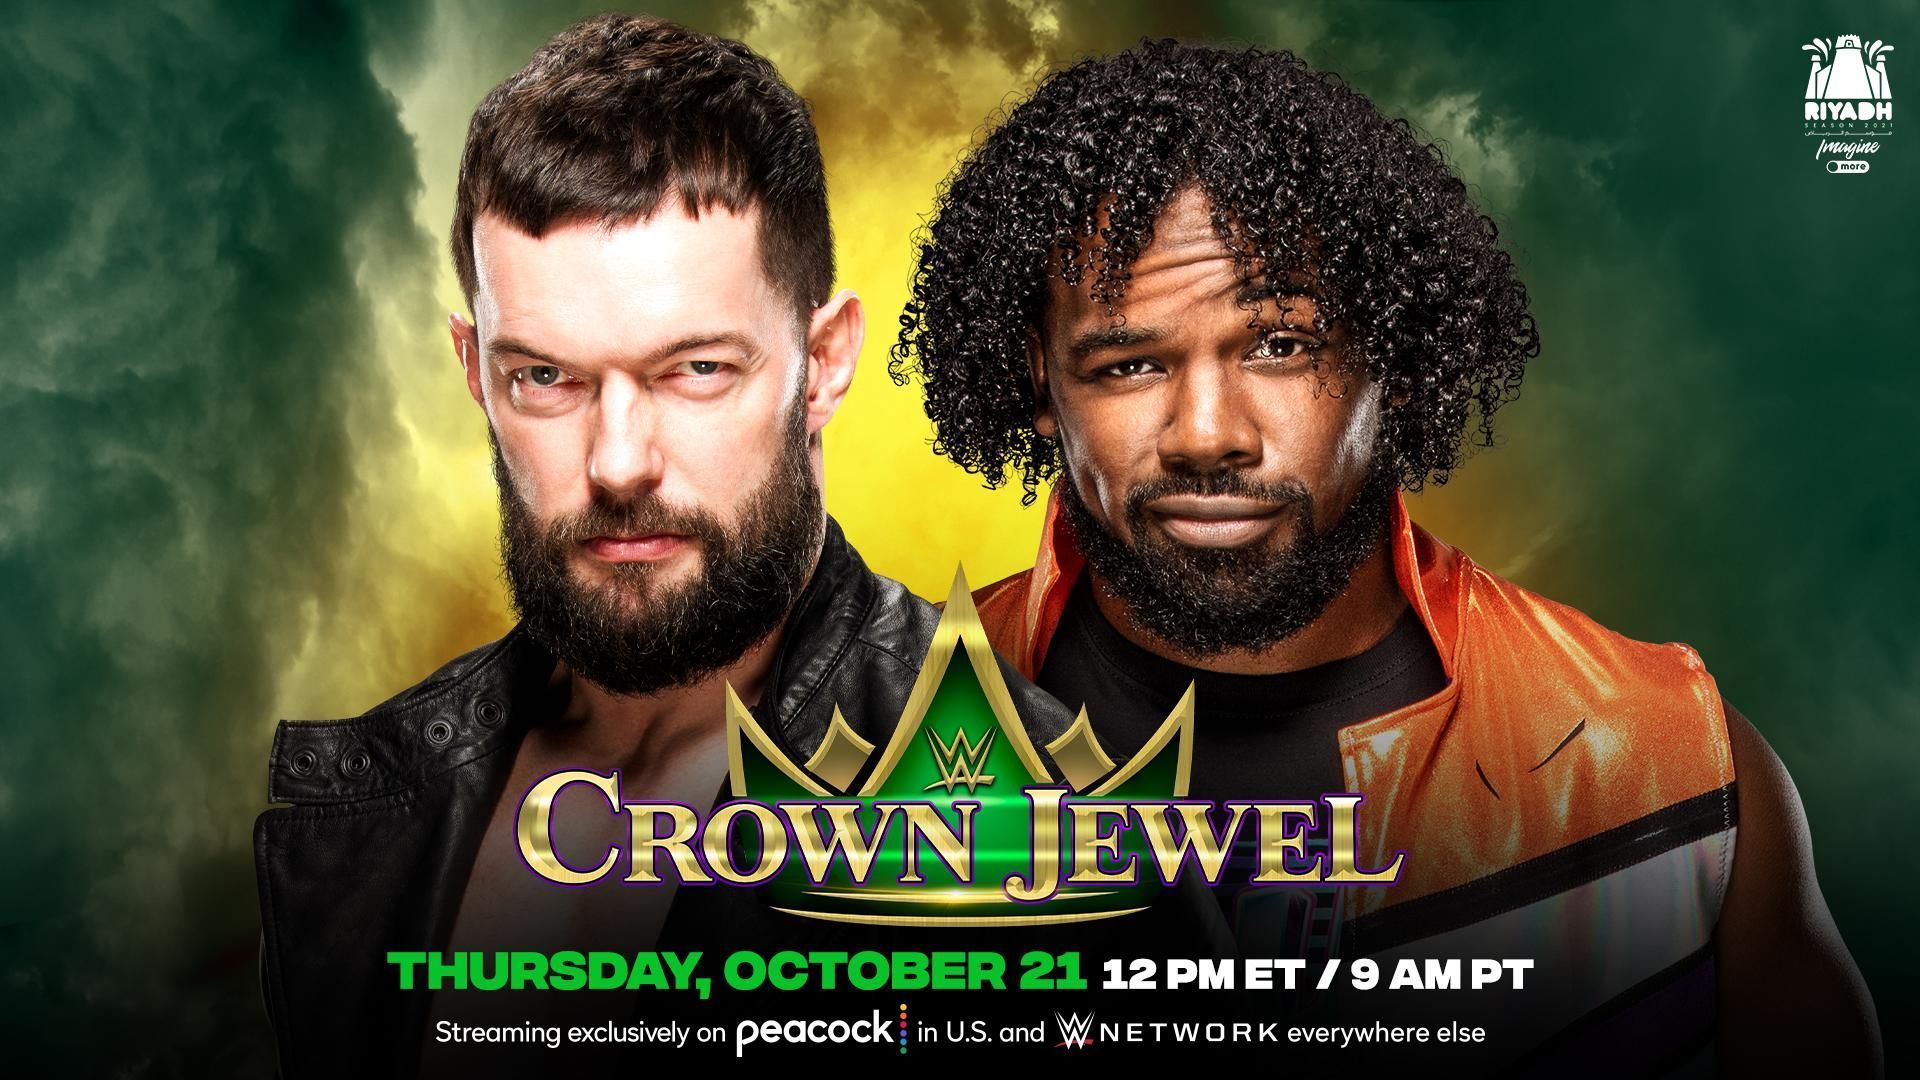 Xavier Woods will go head-to-head with Finn Balor at Crown Jewel